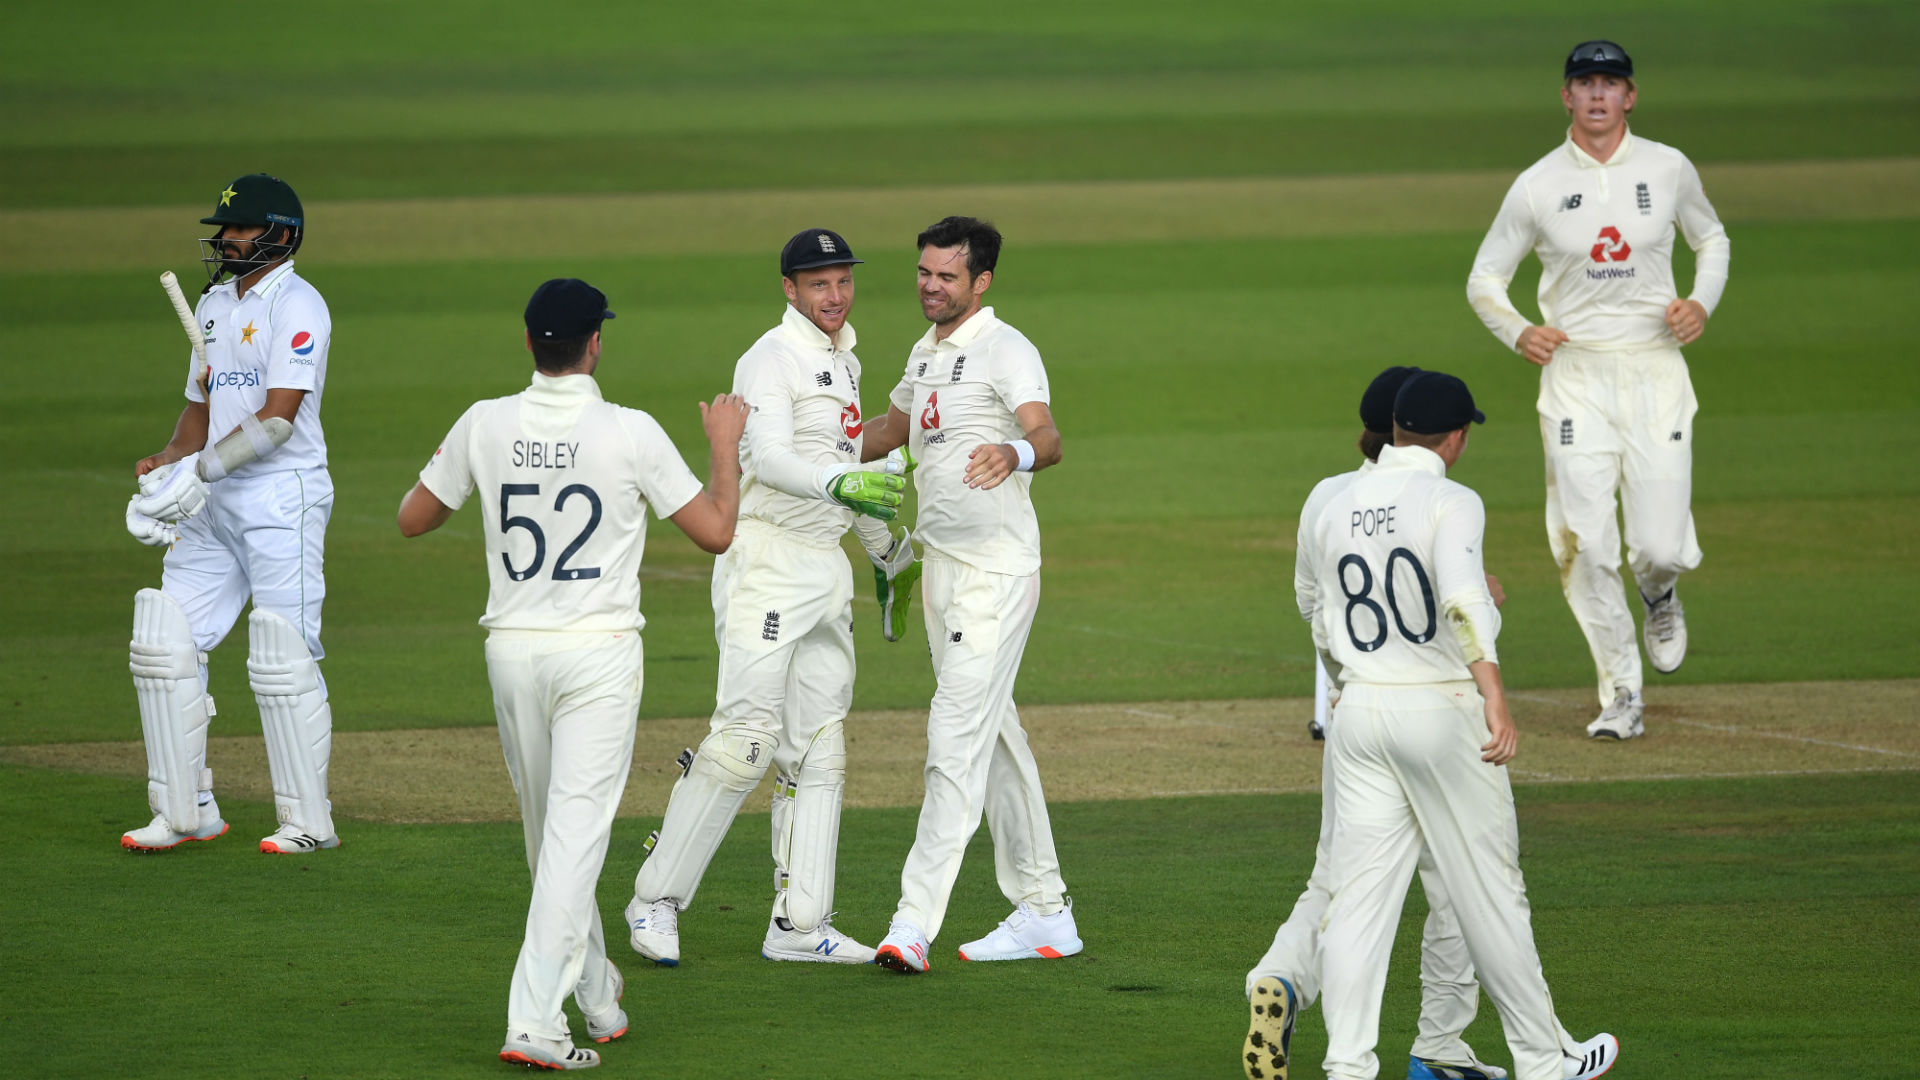 James Anderson took two wickets as England restricted Pakistan to 126-5 in a day interrupted by the weather in Southampton.